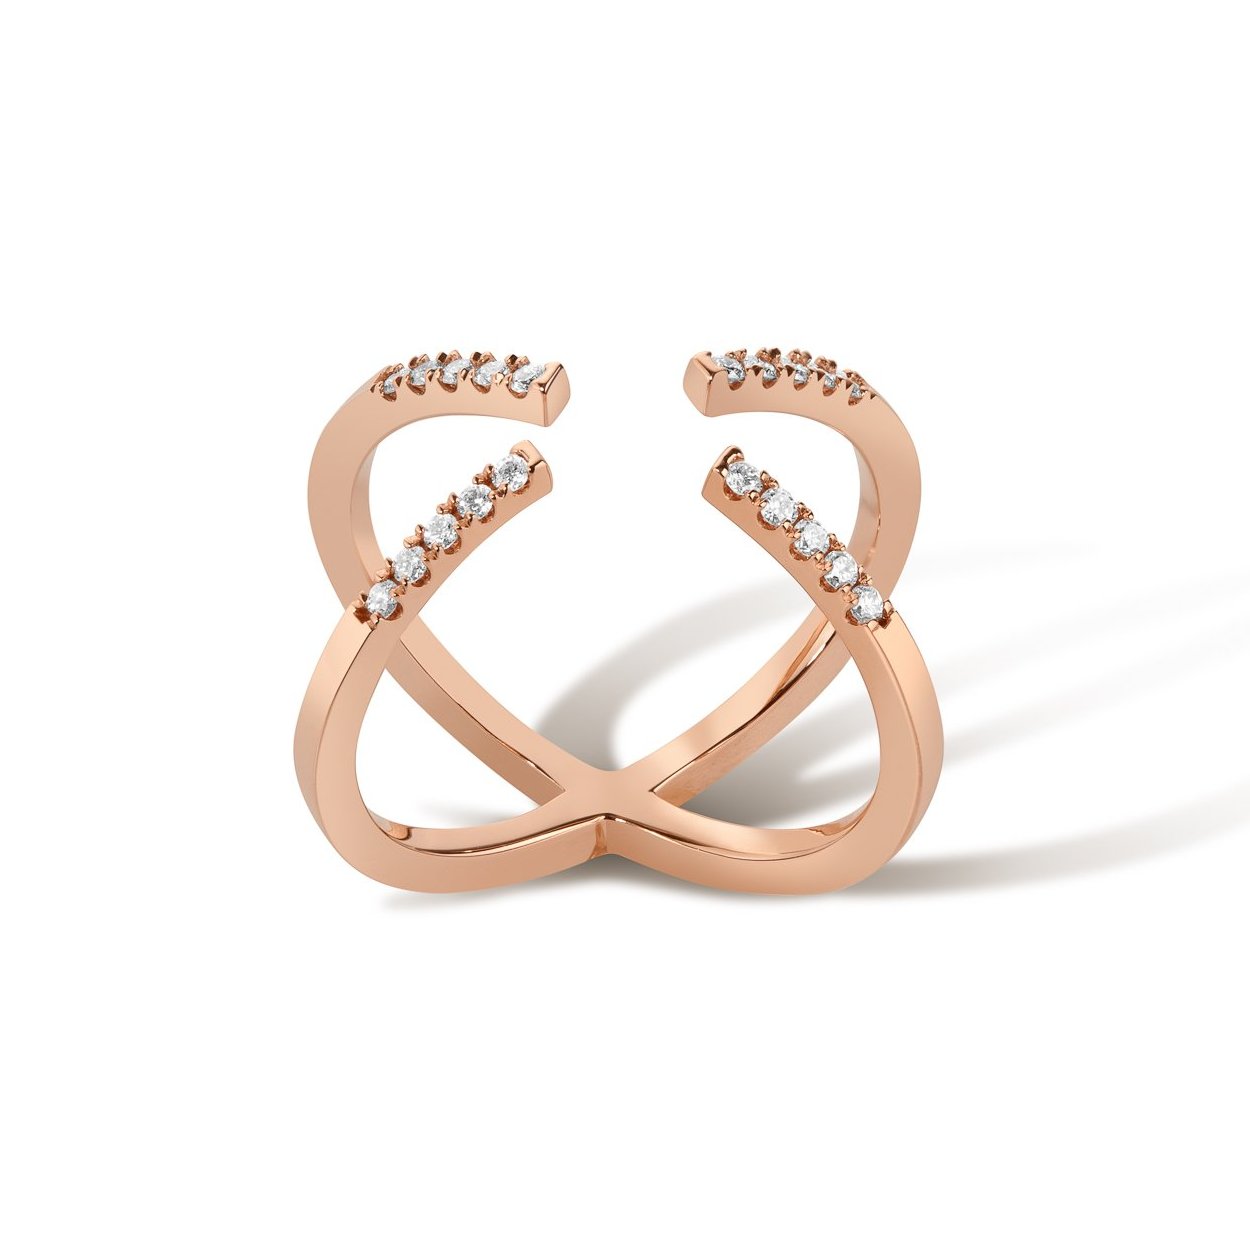 Shahla Karimi Jewelry Central Park X-Ring No. 3 in 14K Rose Gold With White Diamonds